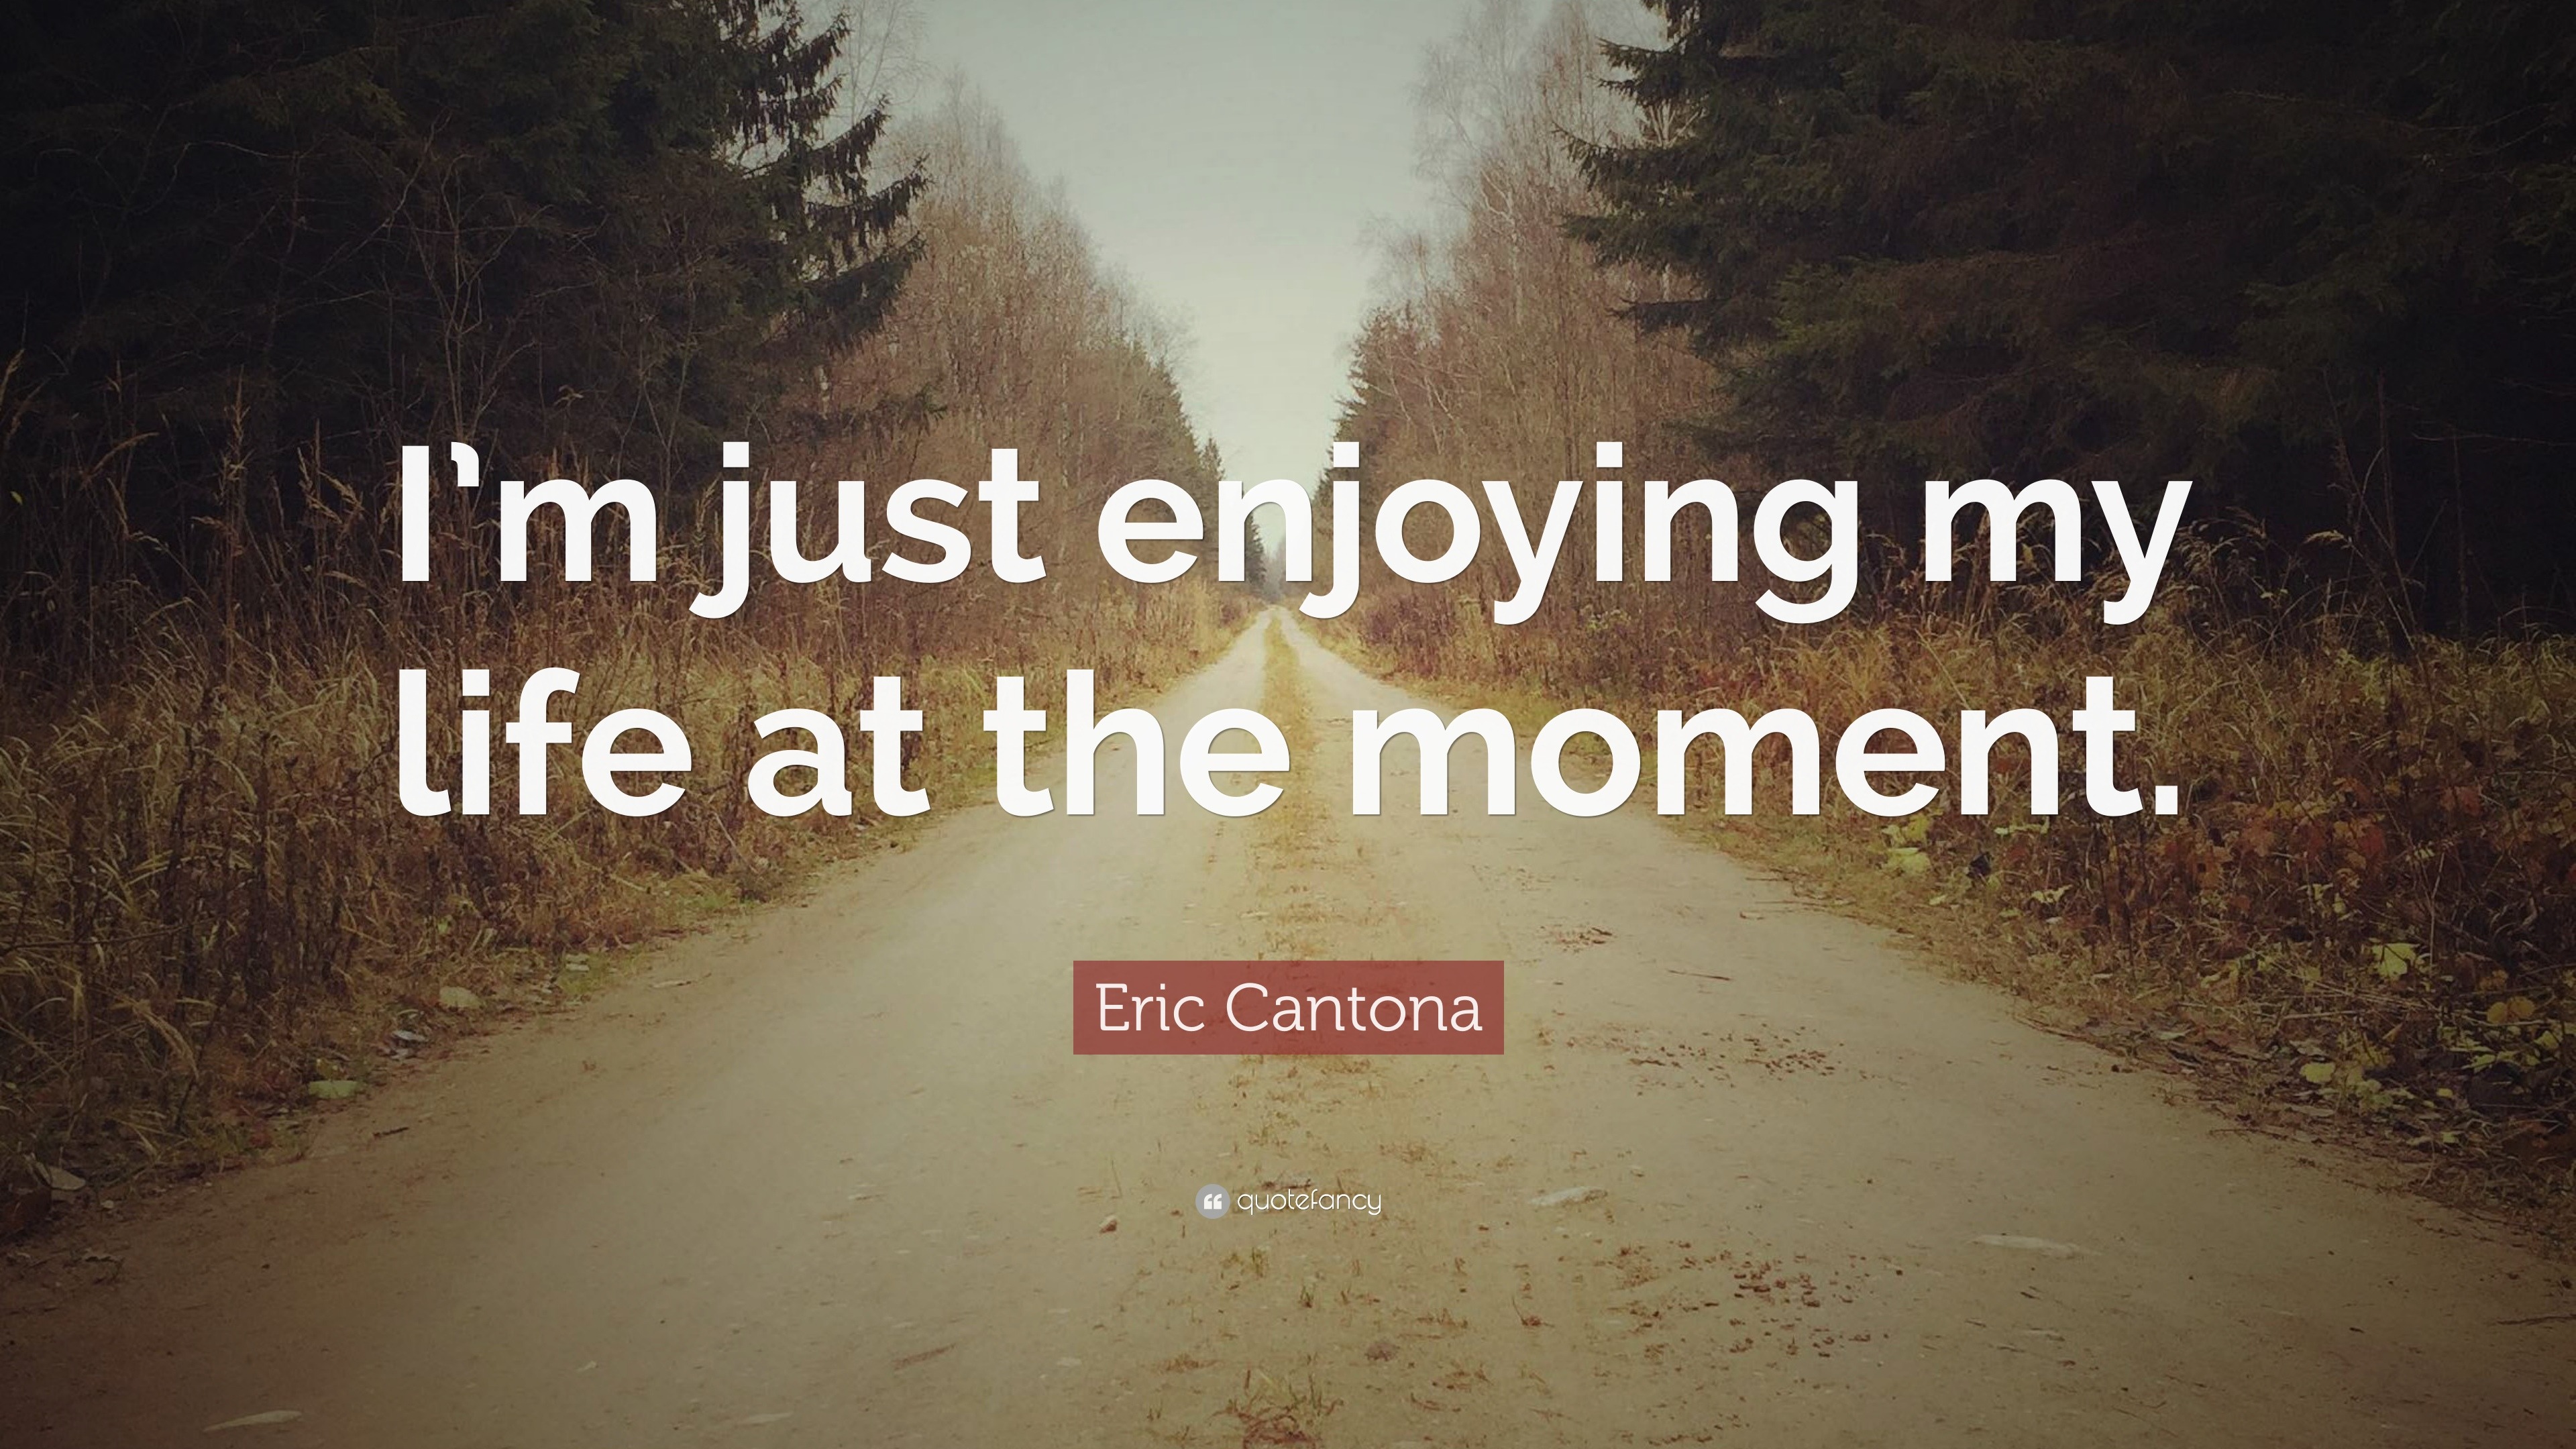 Eric Cantona Quote “I m just enjoying my life at the moment